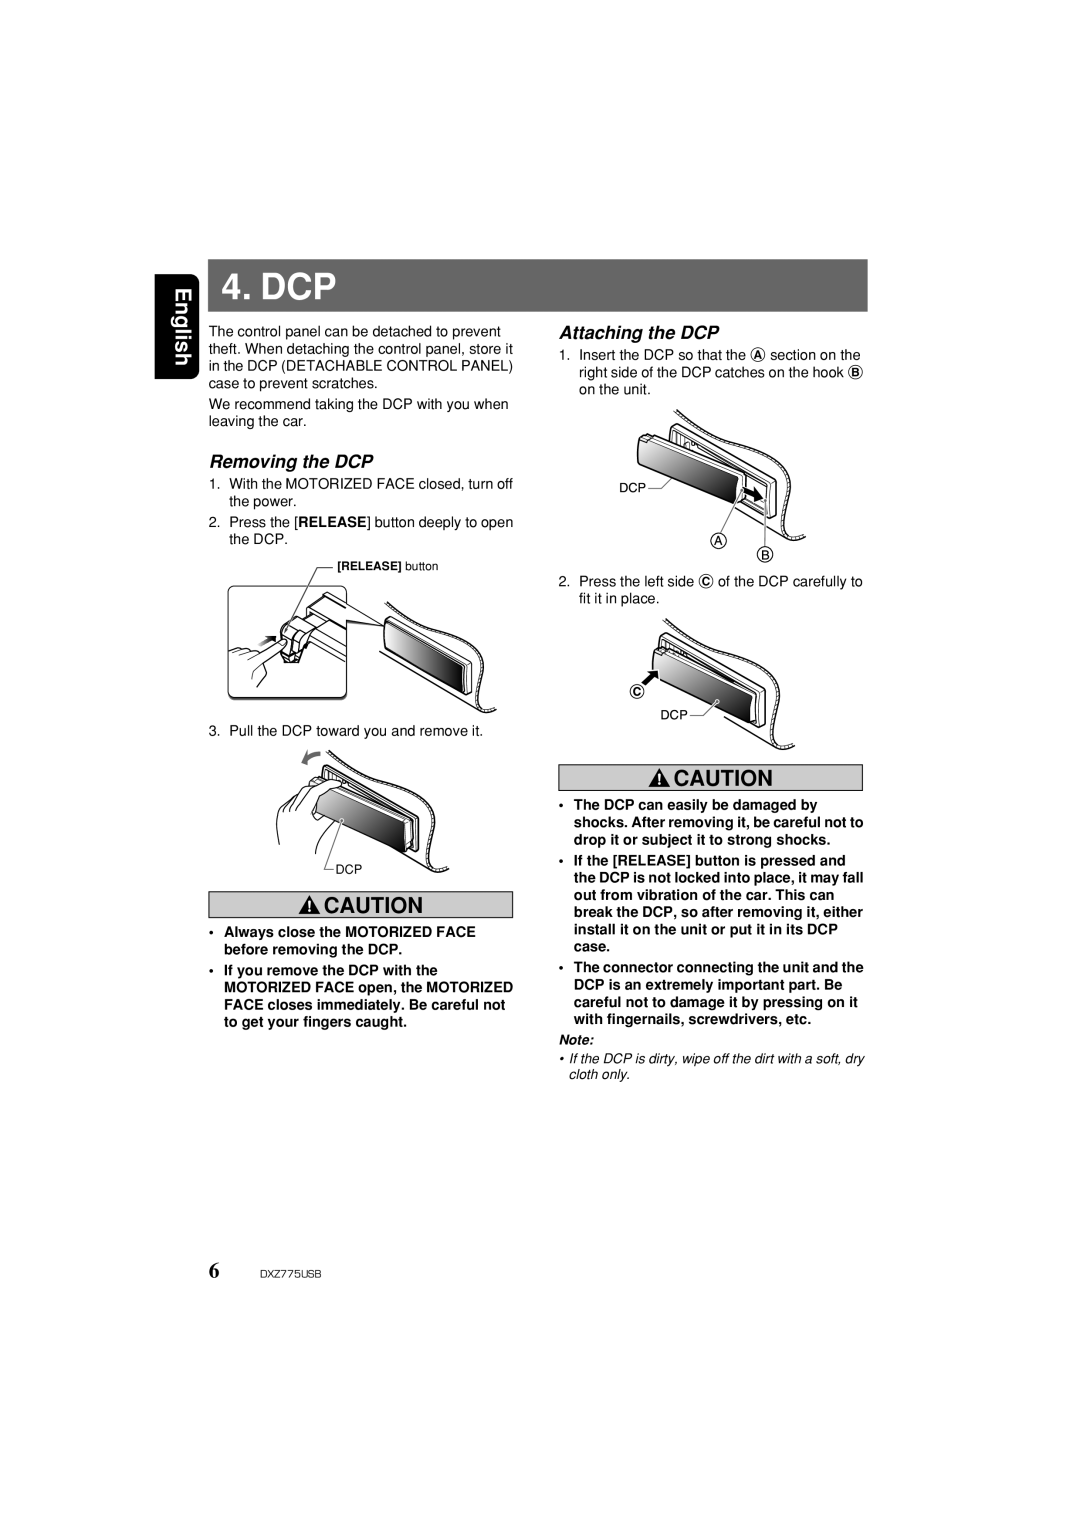 Clarion iDXZ775USB owner manual Dcp, Removing the DCP, Attaching the DCP, English 